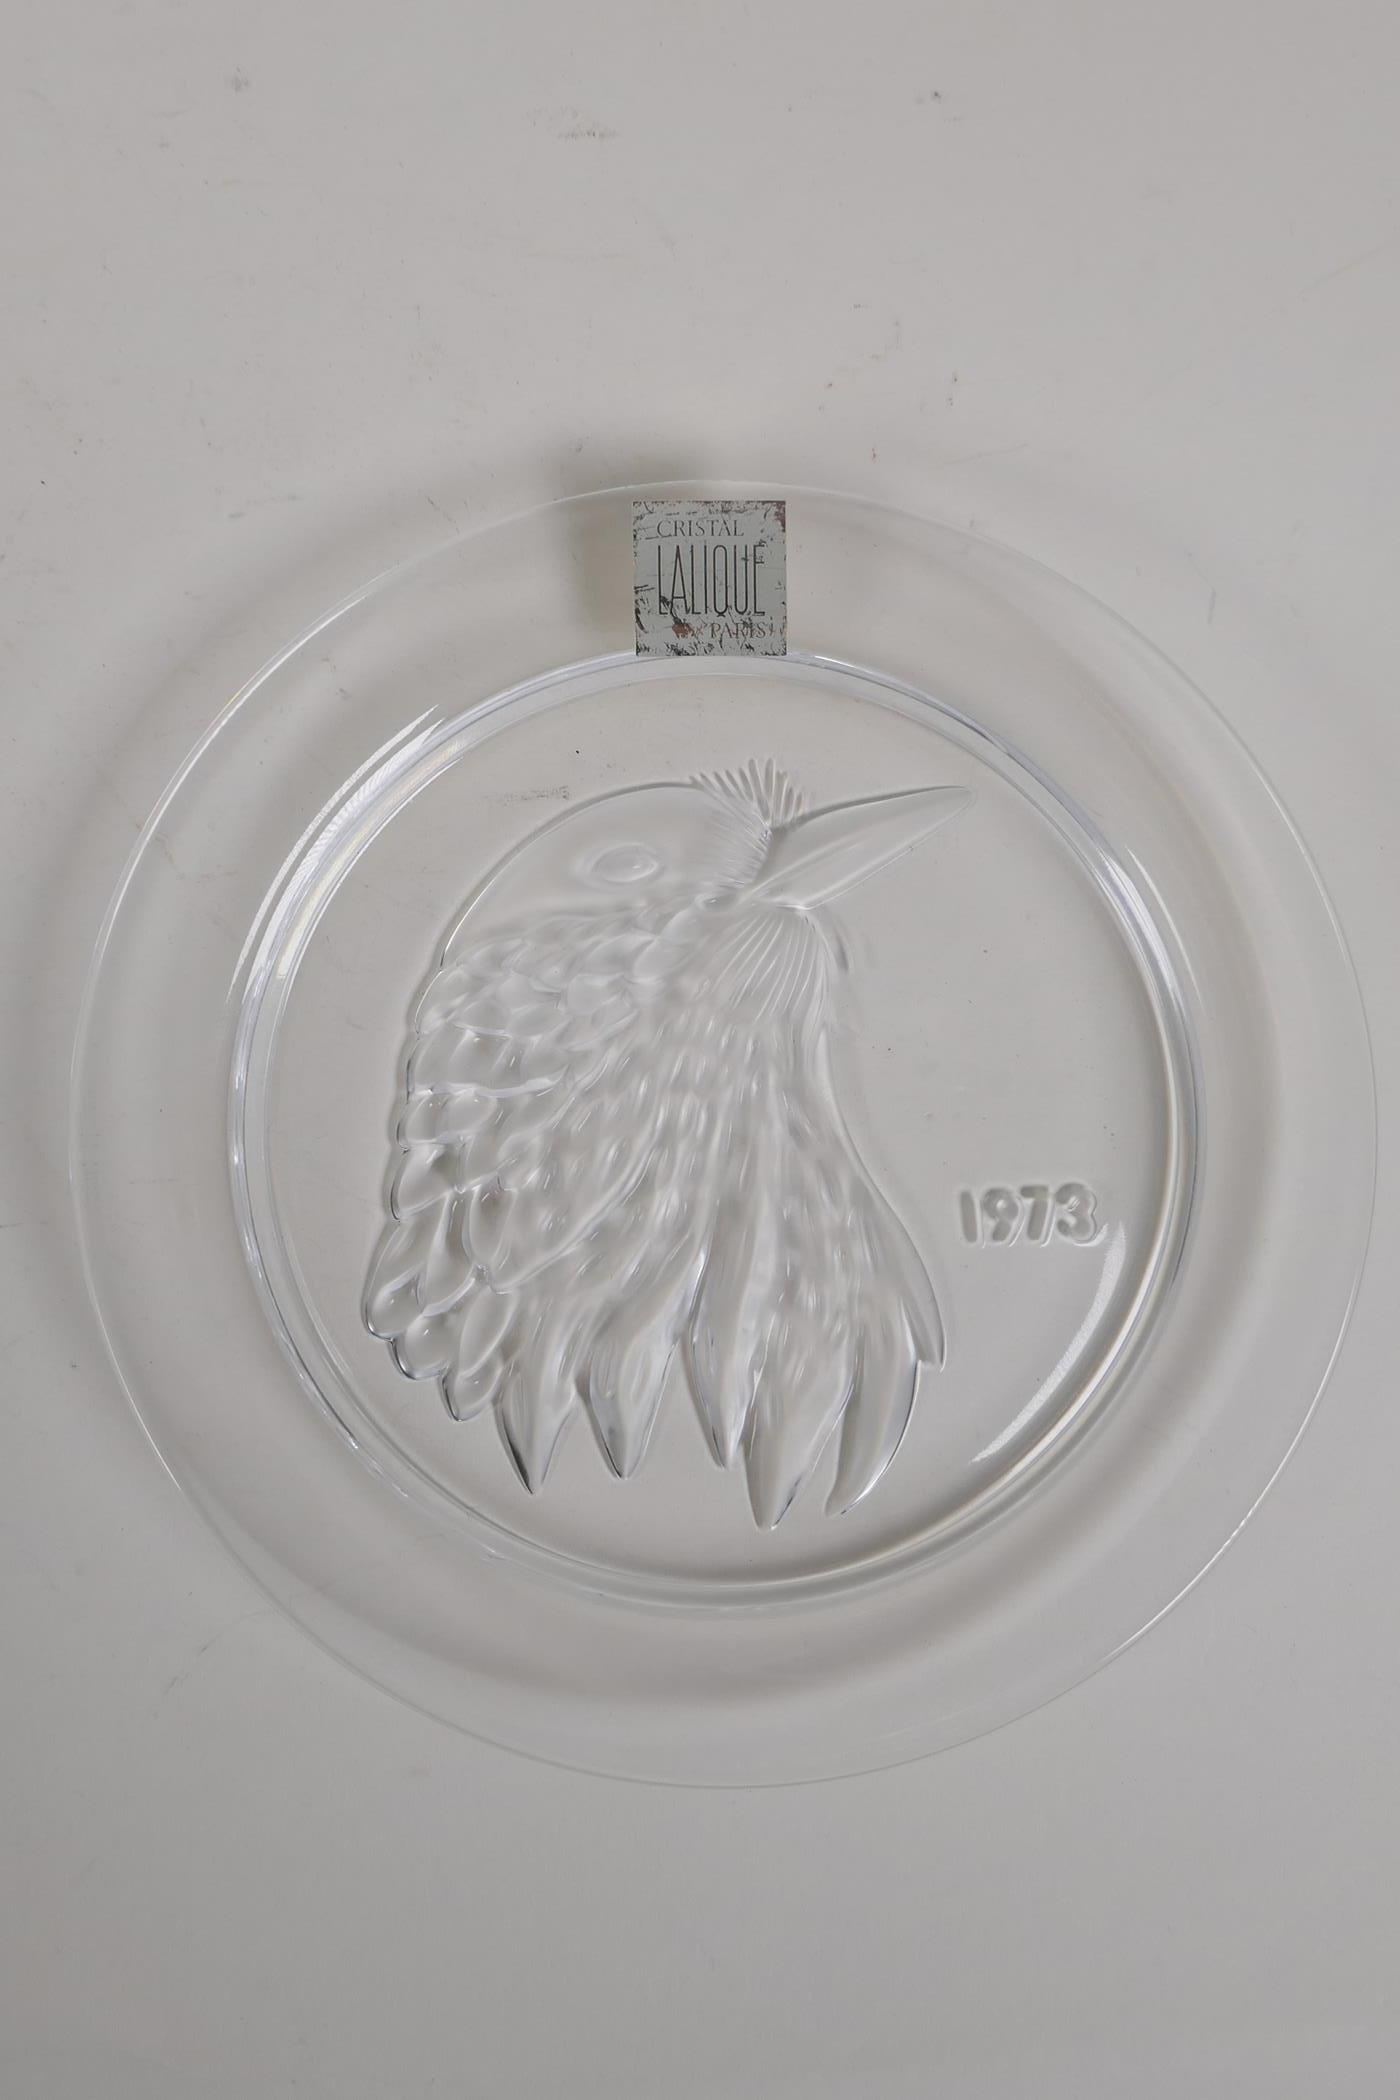 A Lalique crystal 'Jayling' dish, 1973, with original box, leaflets and stickers, 8½" diameter